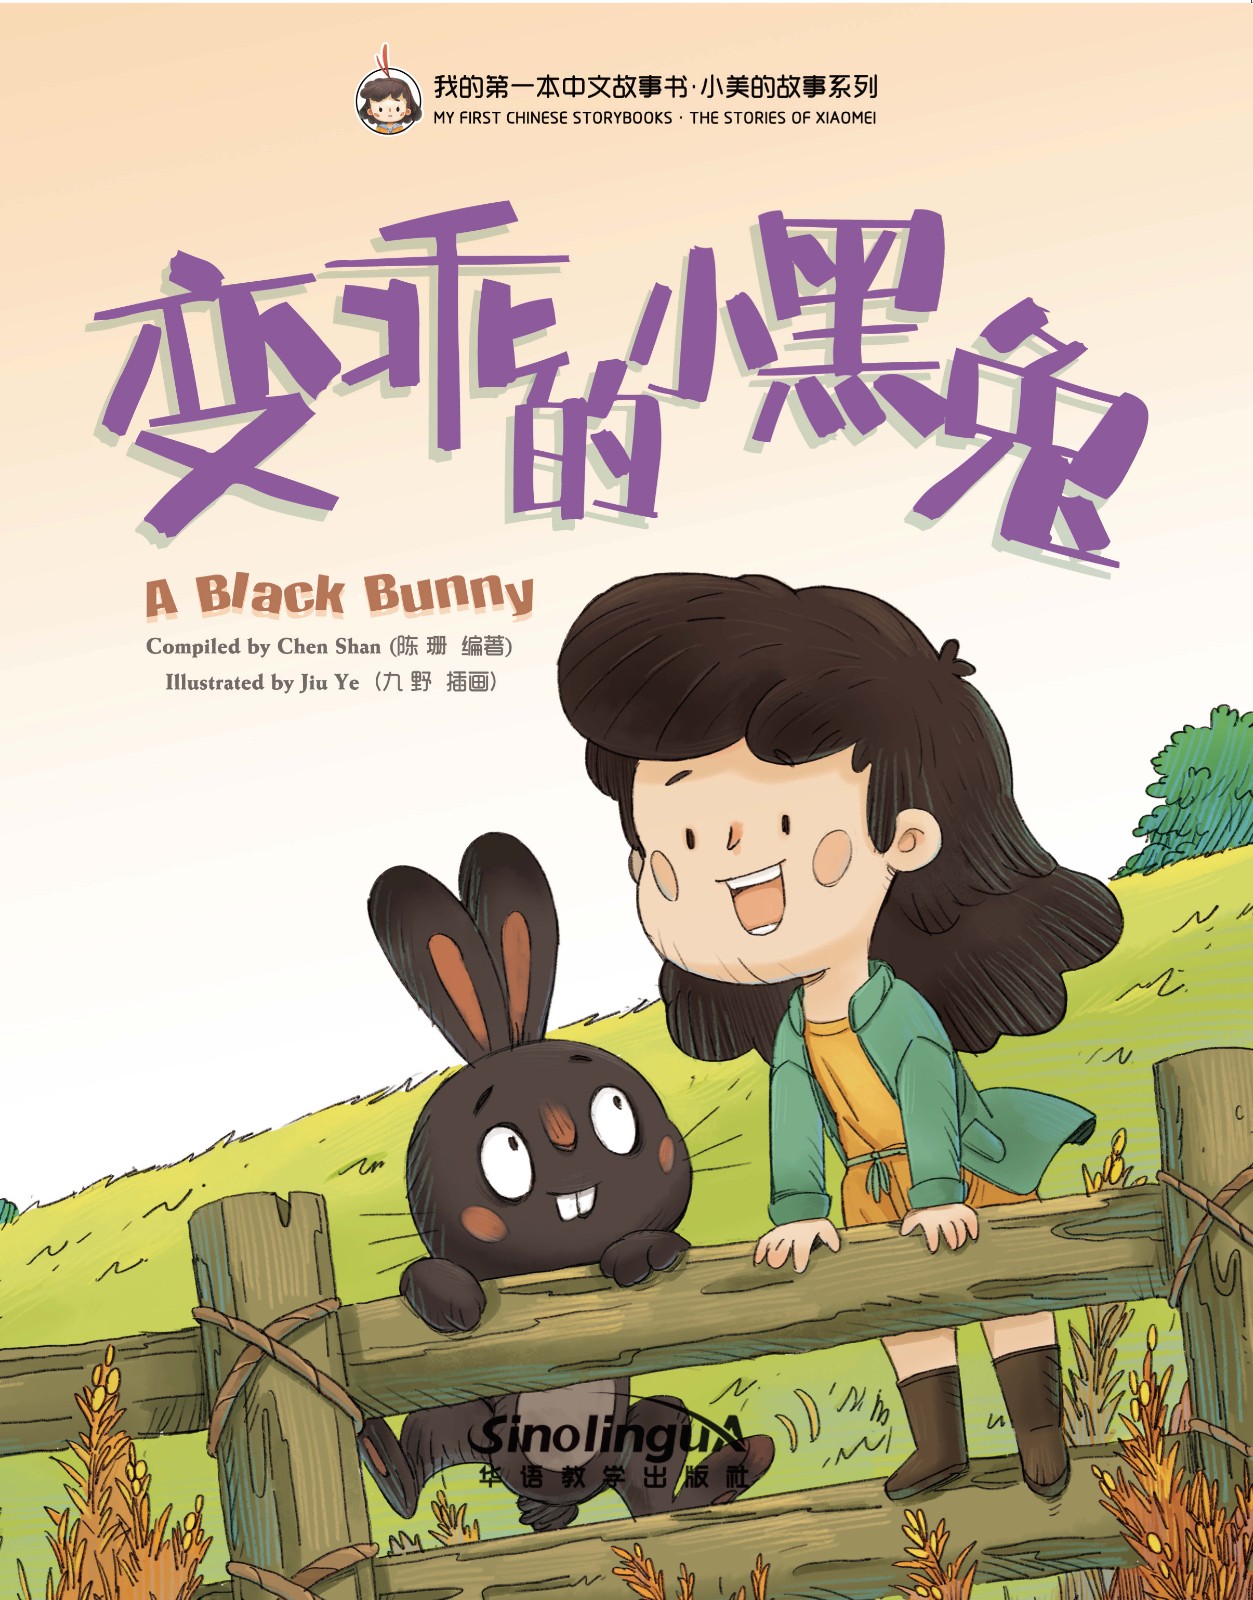 My First Chinese Storybooks-The Stories of Xiaomei<A Black Bunny>